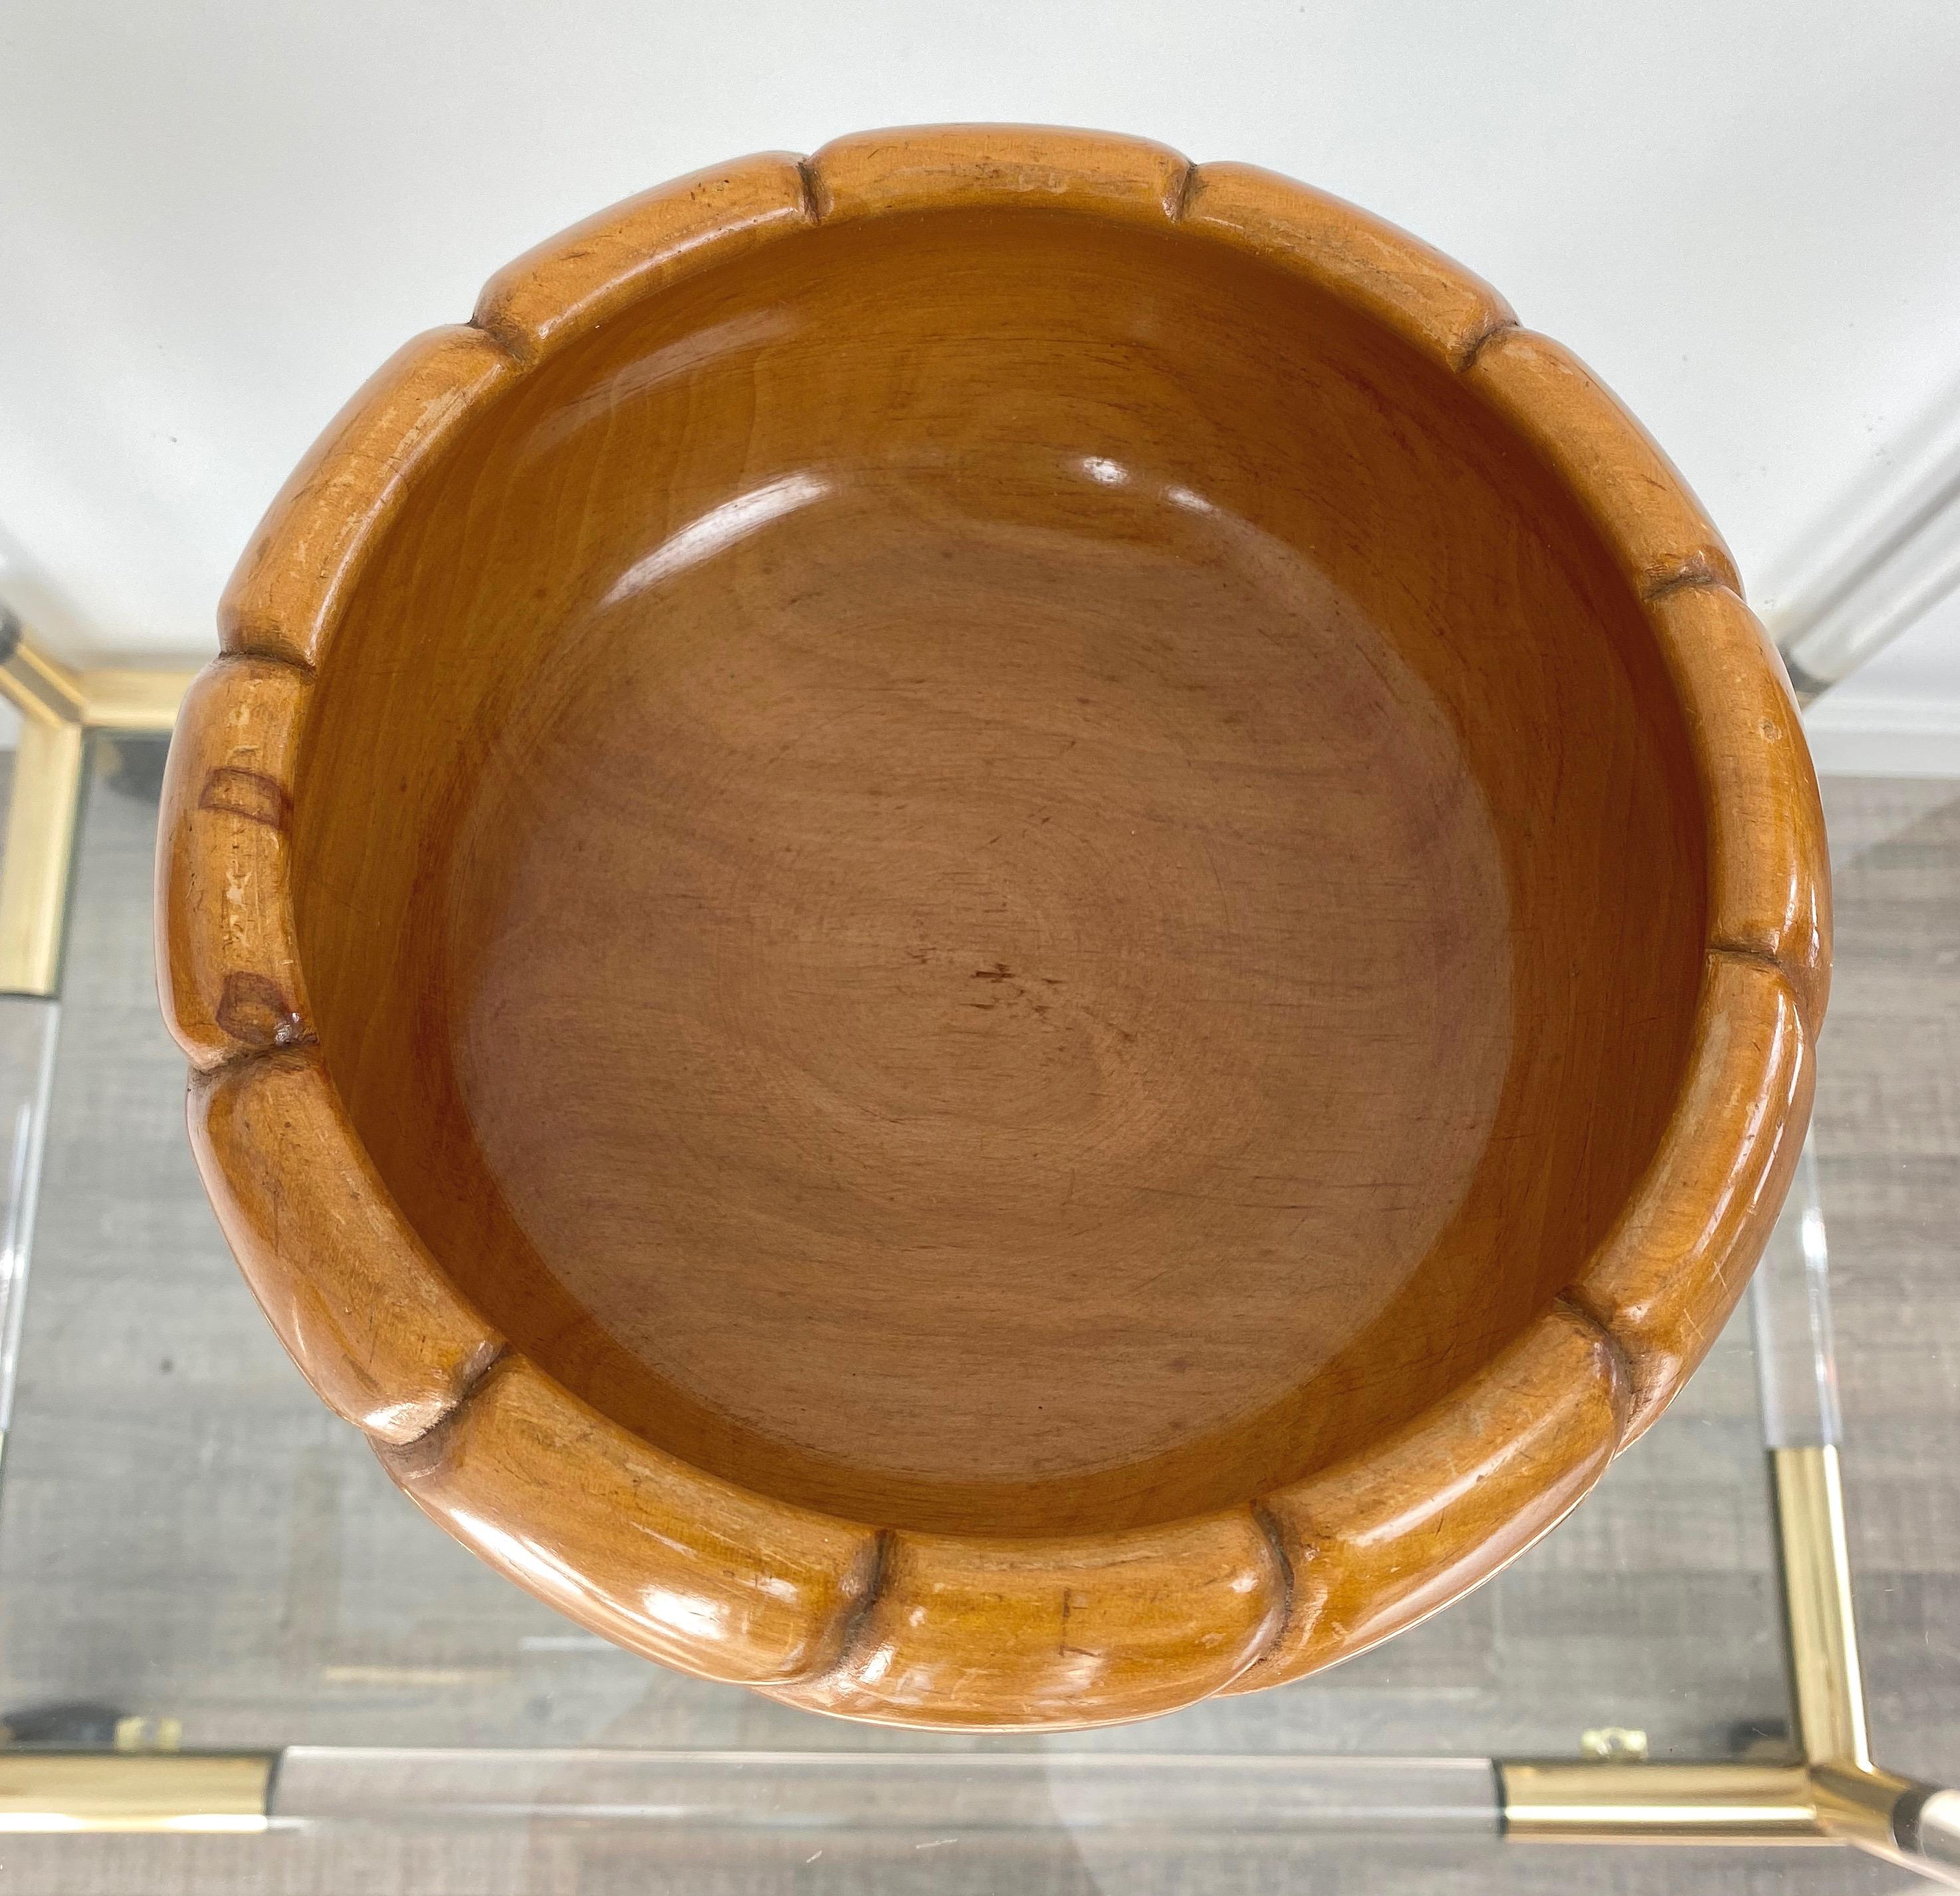 Mid-20th Century Wood Box Bowl by Aldo Tura for Macabo Italy 1950s Art Deco For Sale